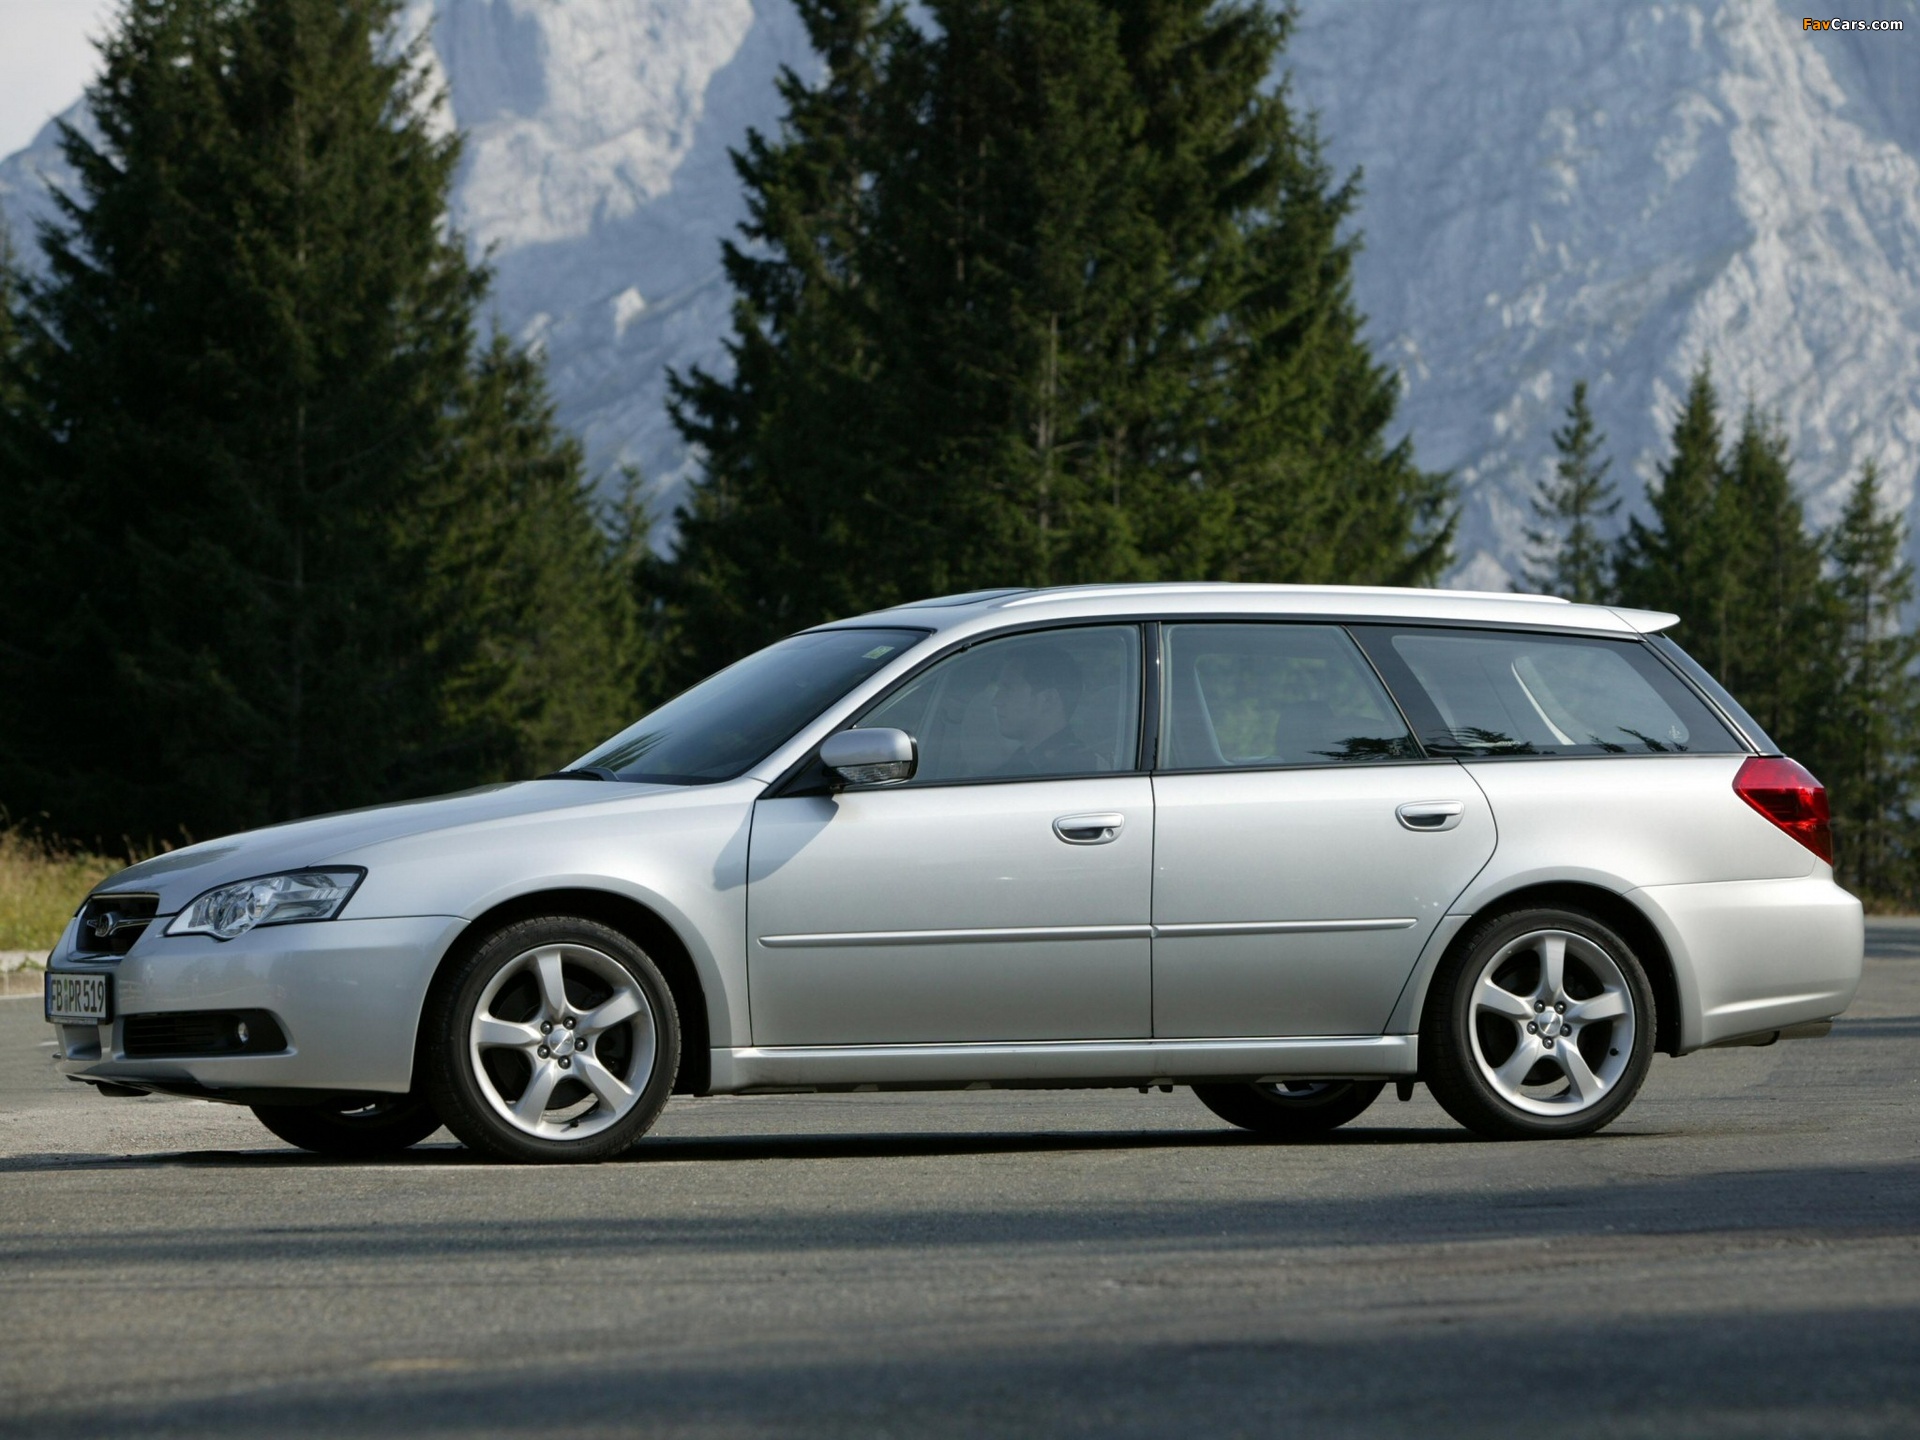 Pictures of Subaru Legacy 3.0R Station Wagon 200306